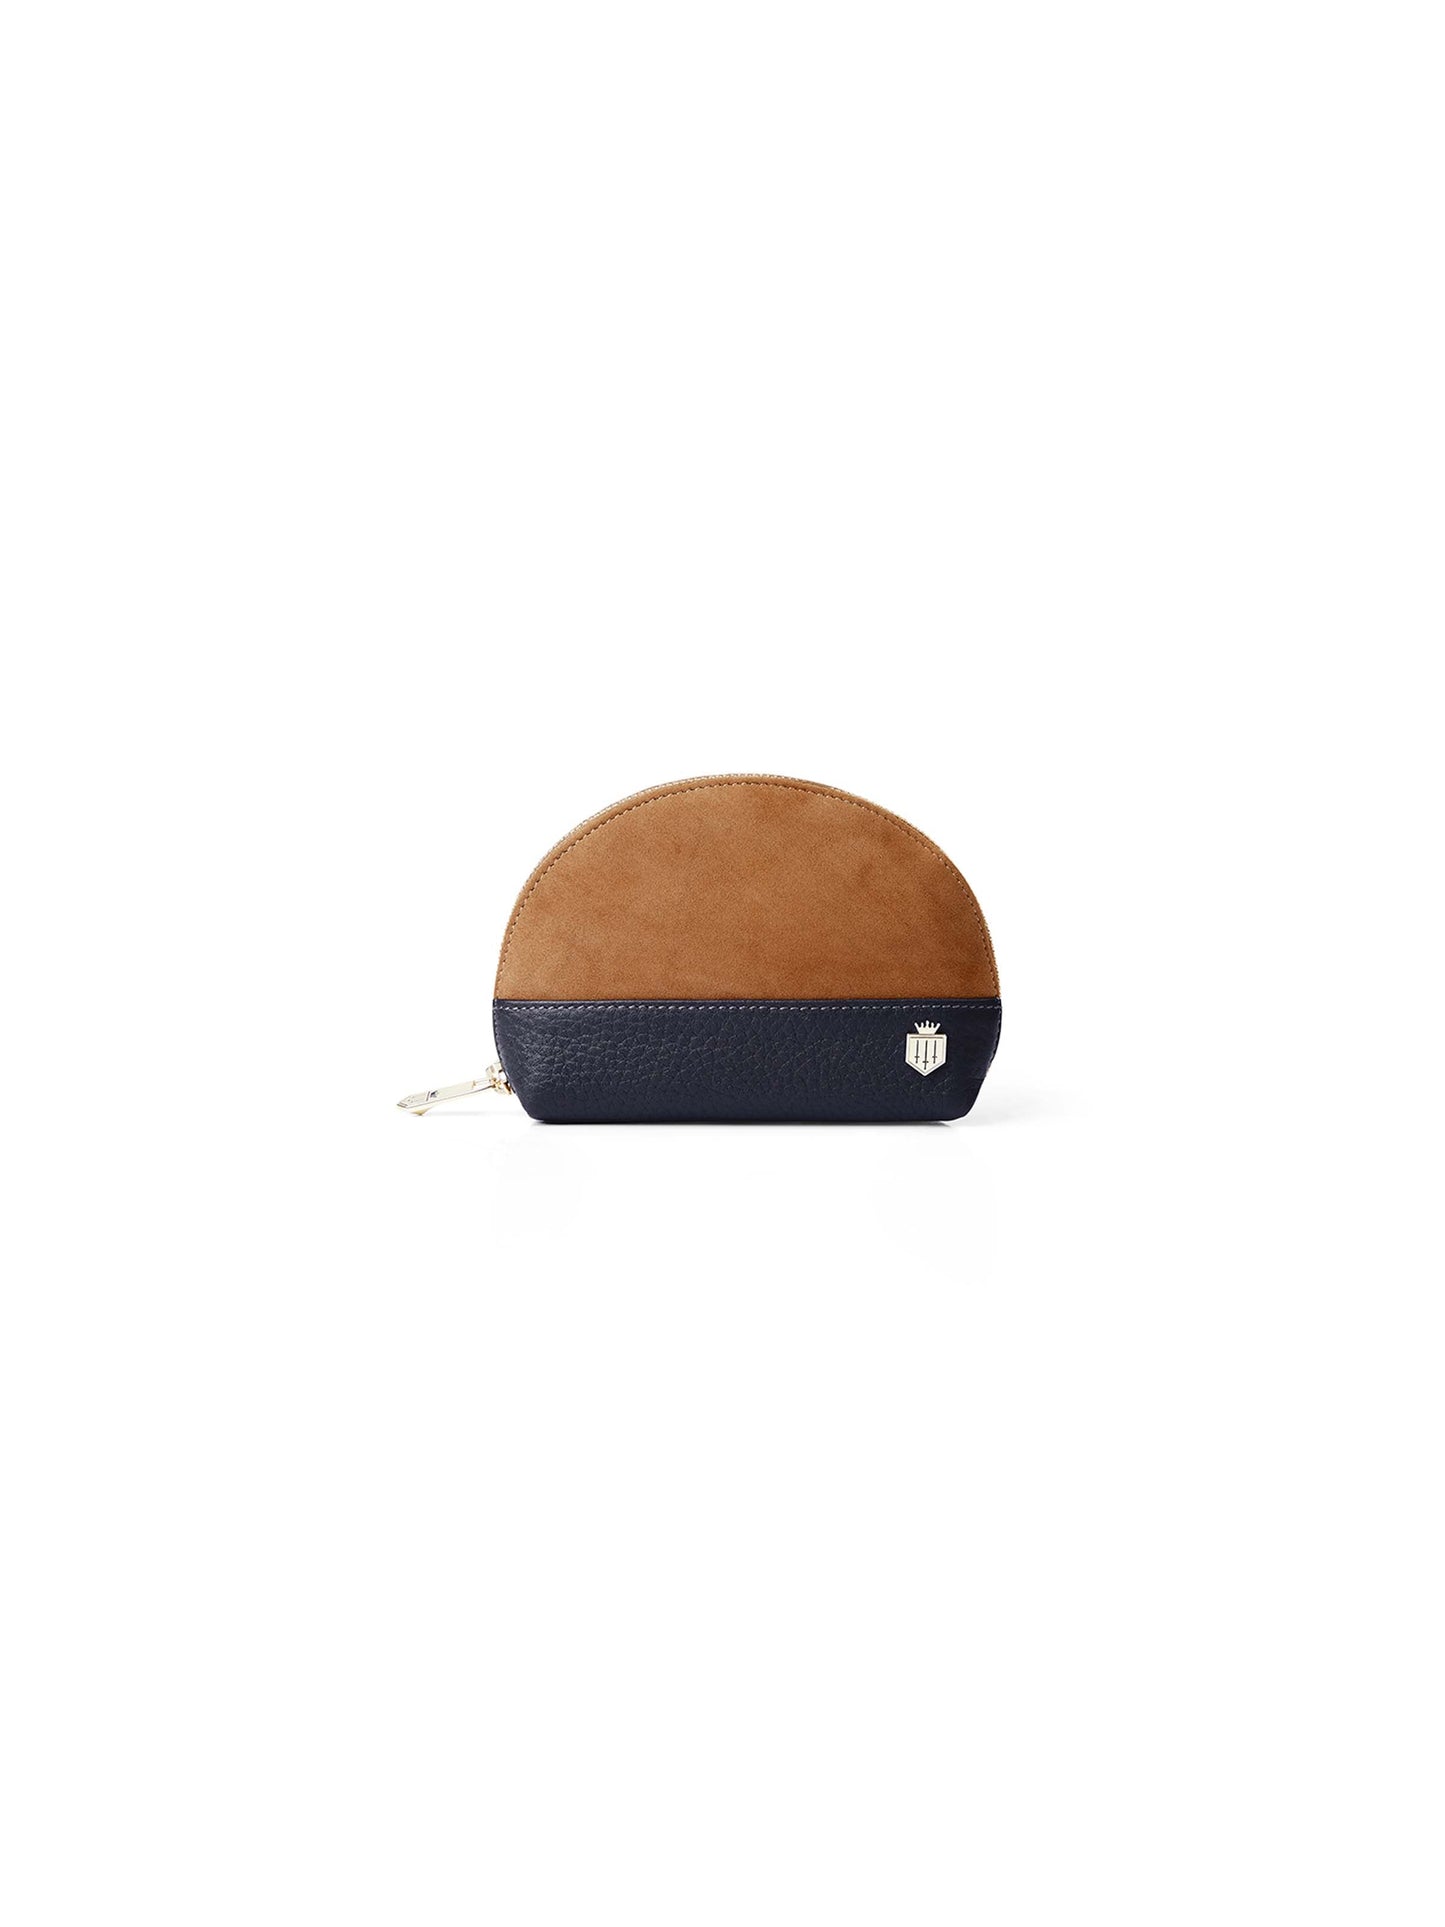 The Chiltern Coin Purse - Tan & Navy Suede